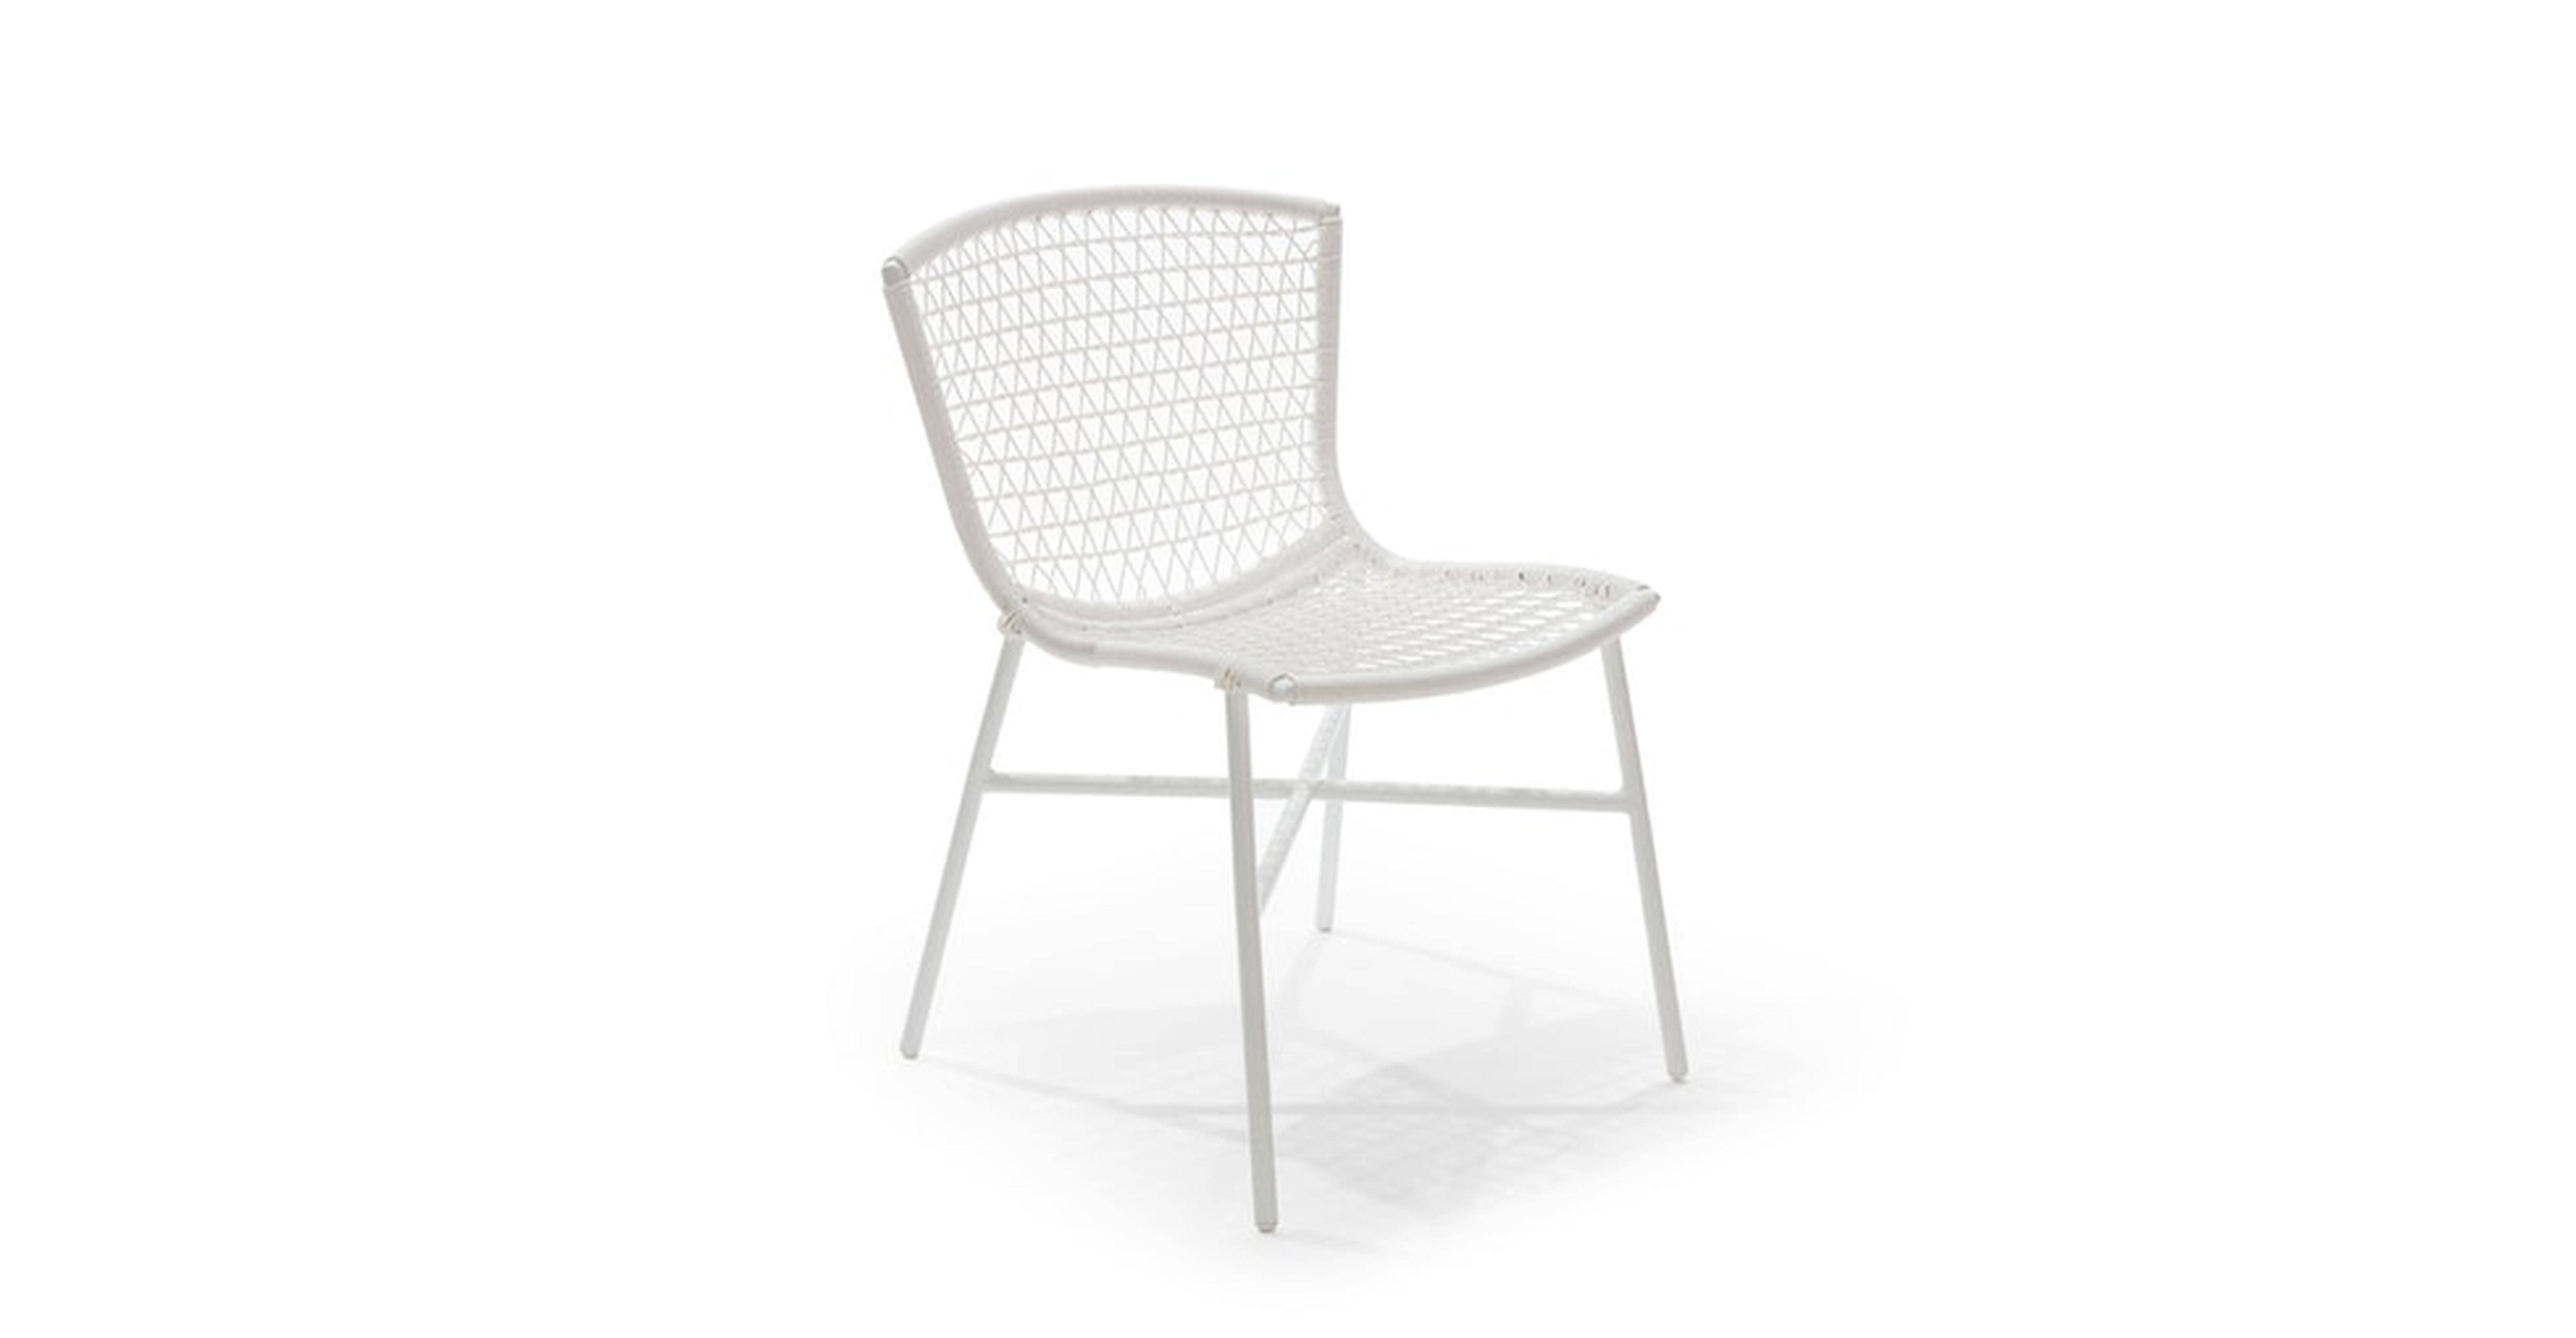 Sala White Dining Chair pair (2) - Article